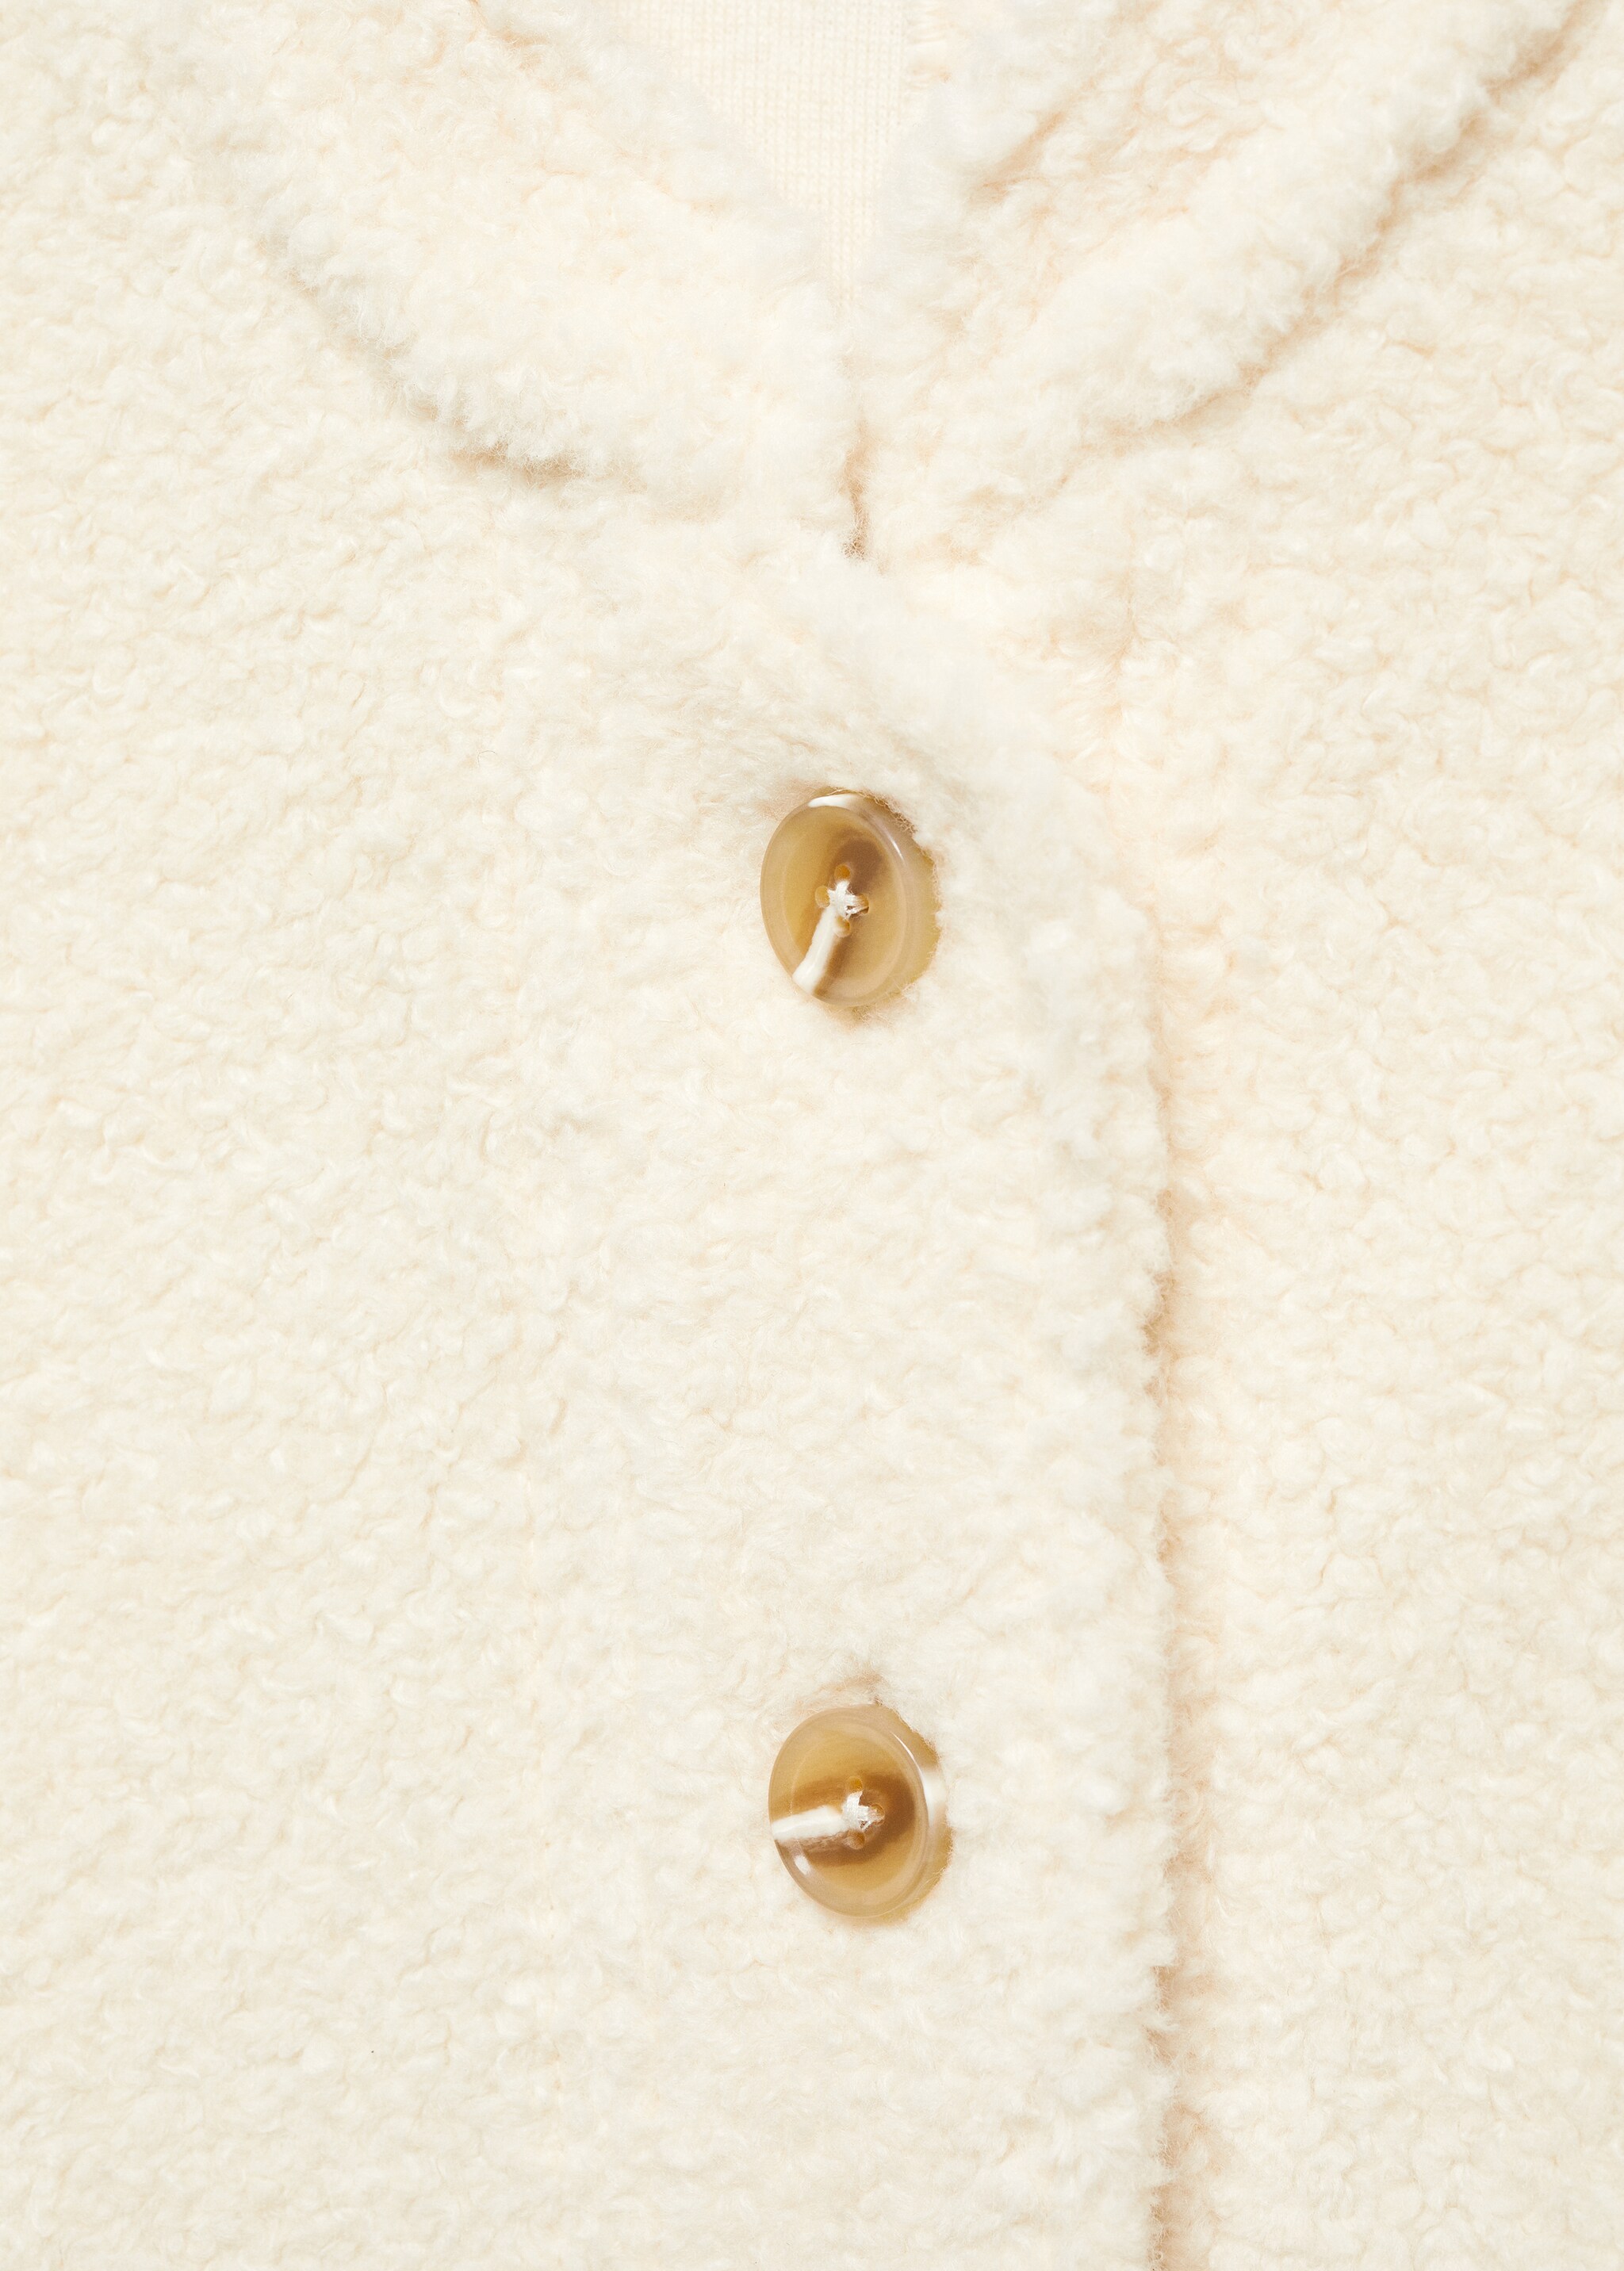 Faux shearling jacket - Details of the article 8